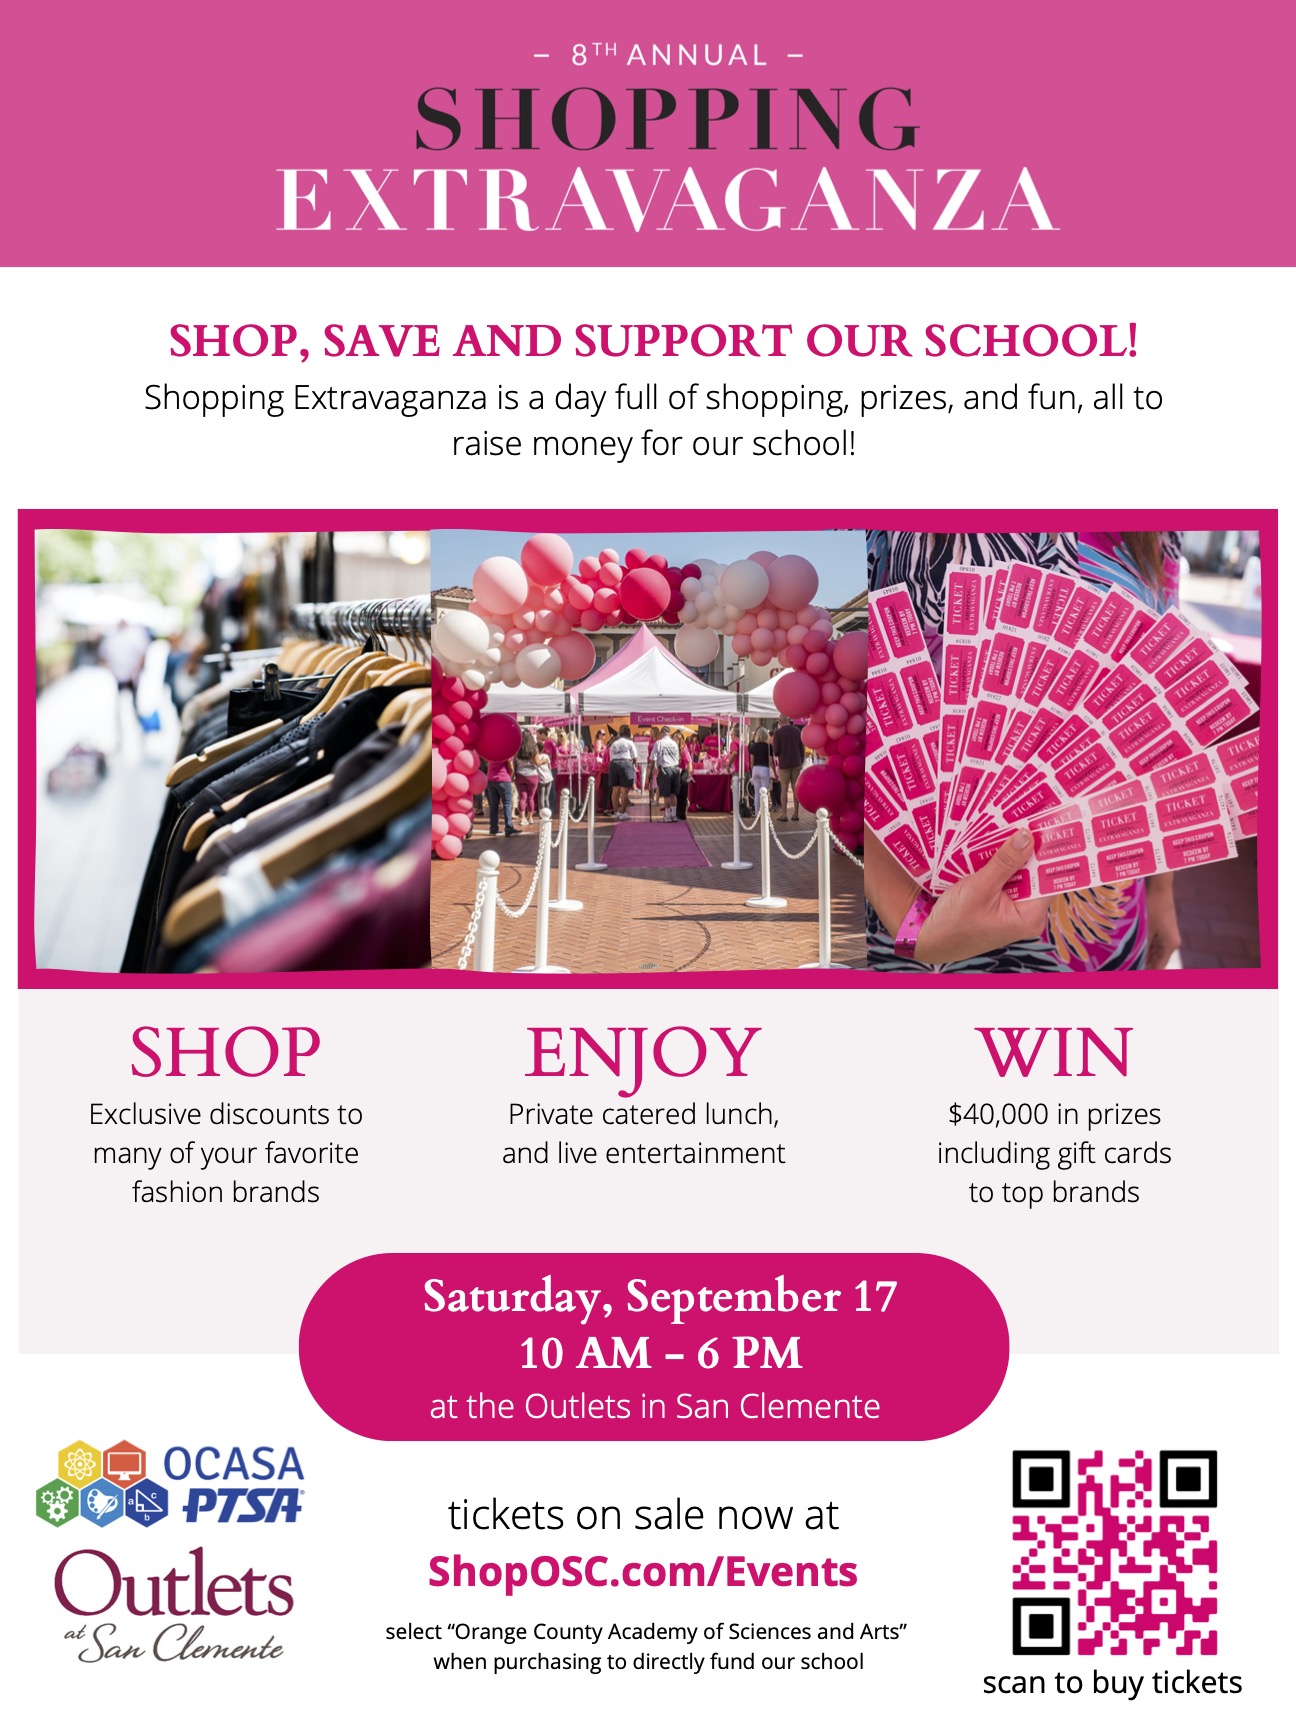 Shop, Save and Support OCASA - Sep 17 - Outlets at San Clemente